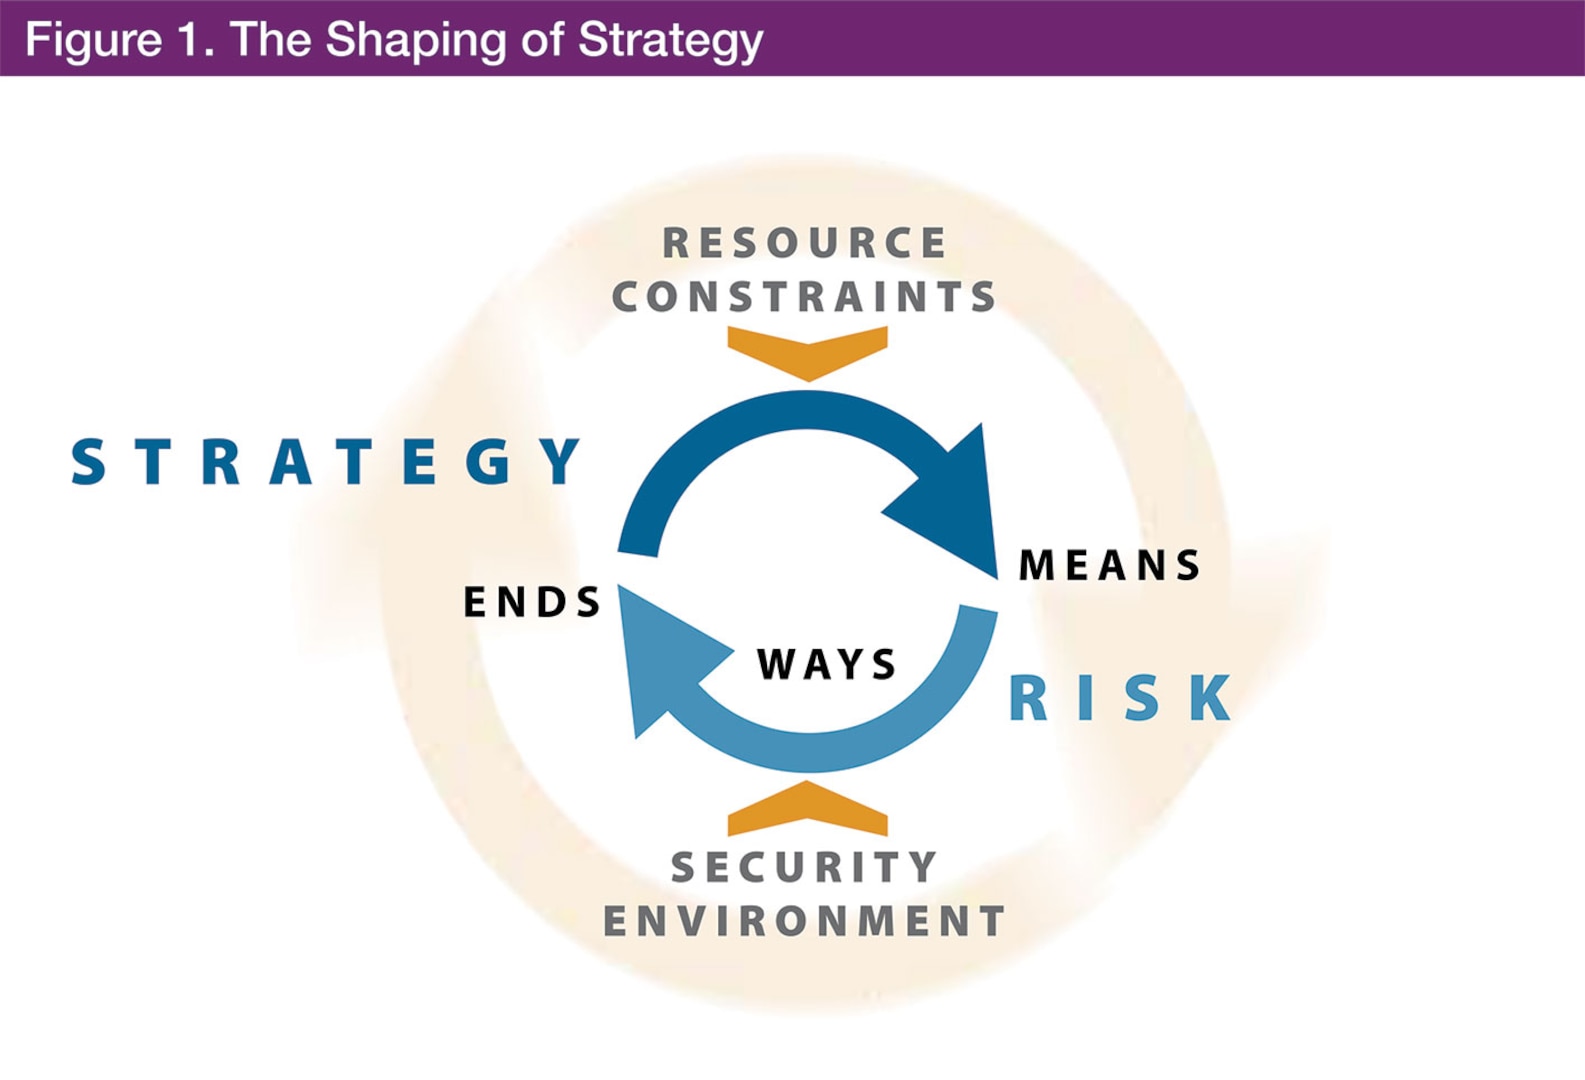 Figure 1. The Shaping of Strategy